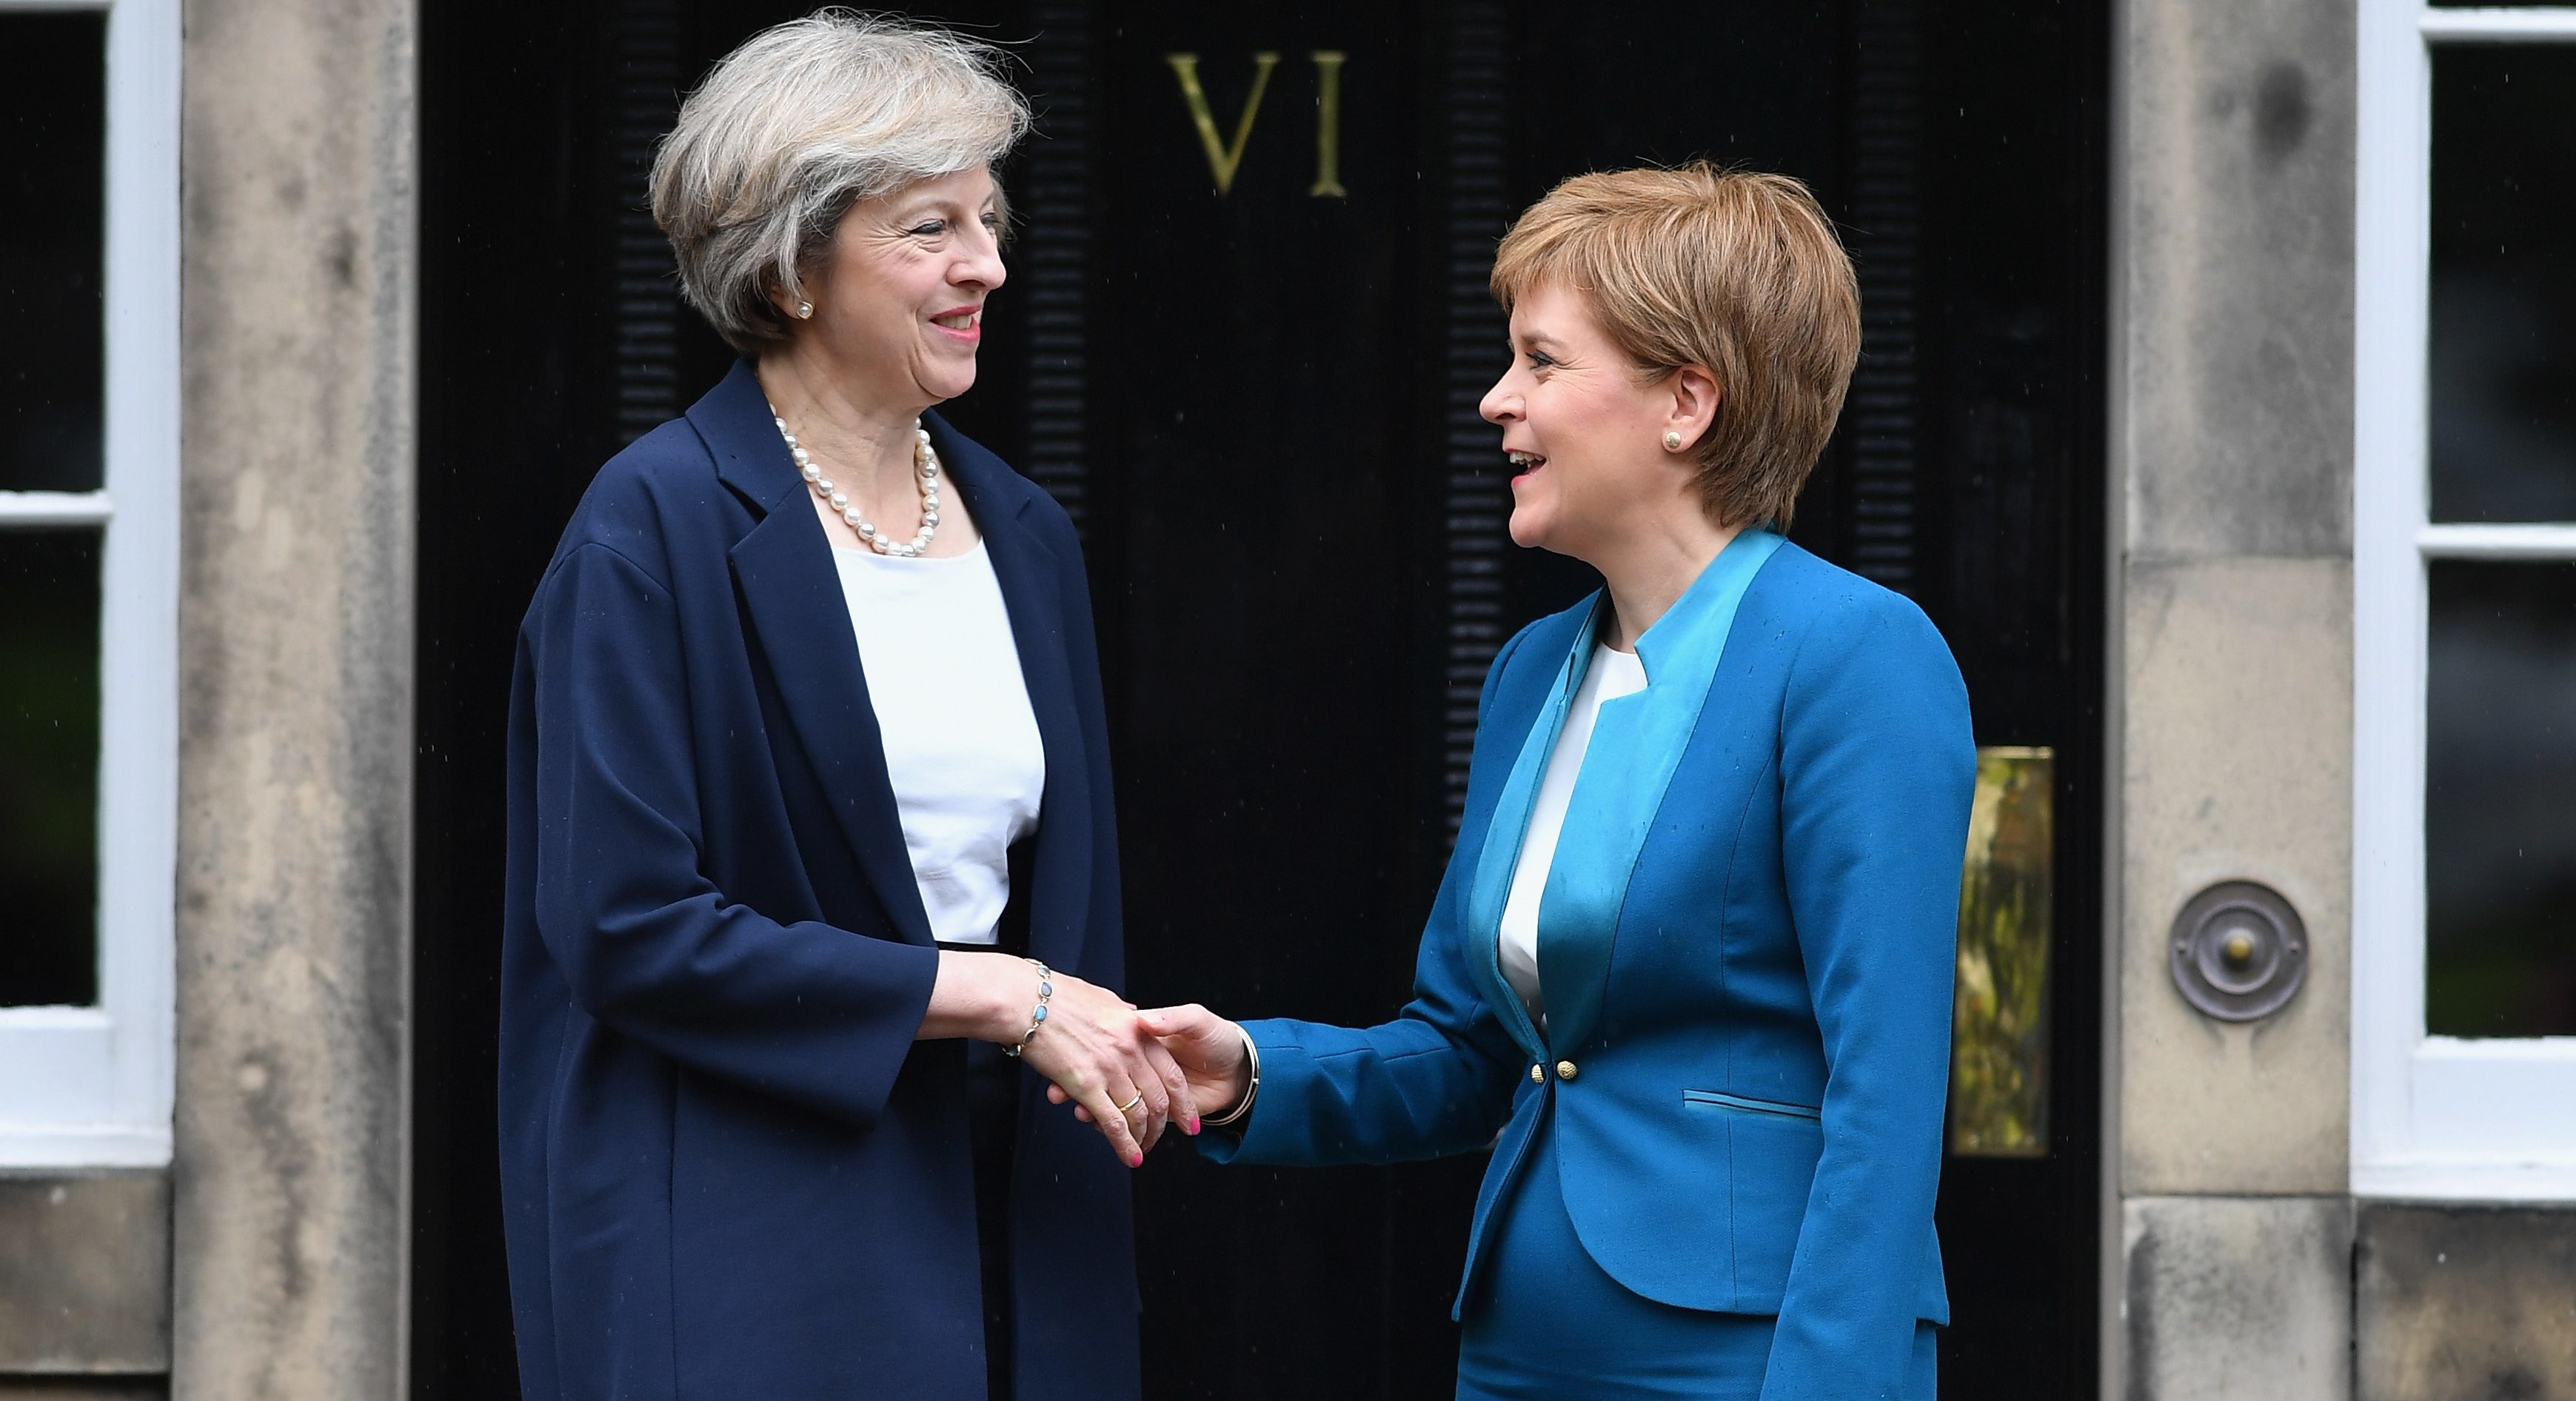 The smiles have been replaced by poker faces as Theresa May and Nicola Sturgeon gamble their futures on Scotland's attitude to independence.